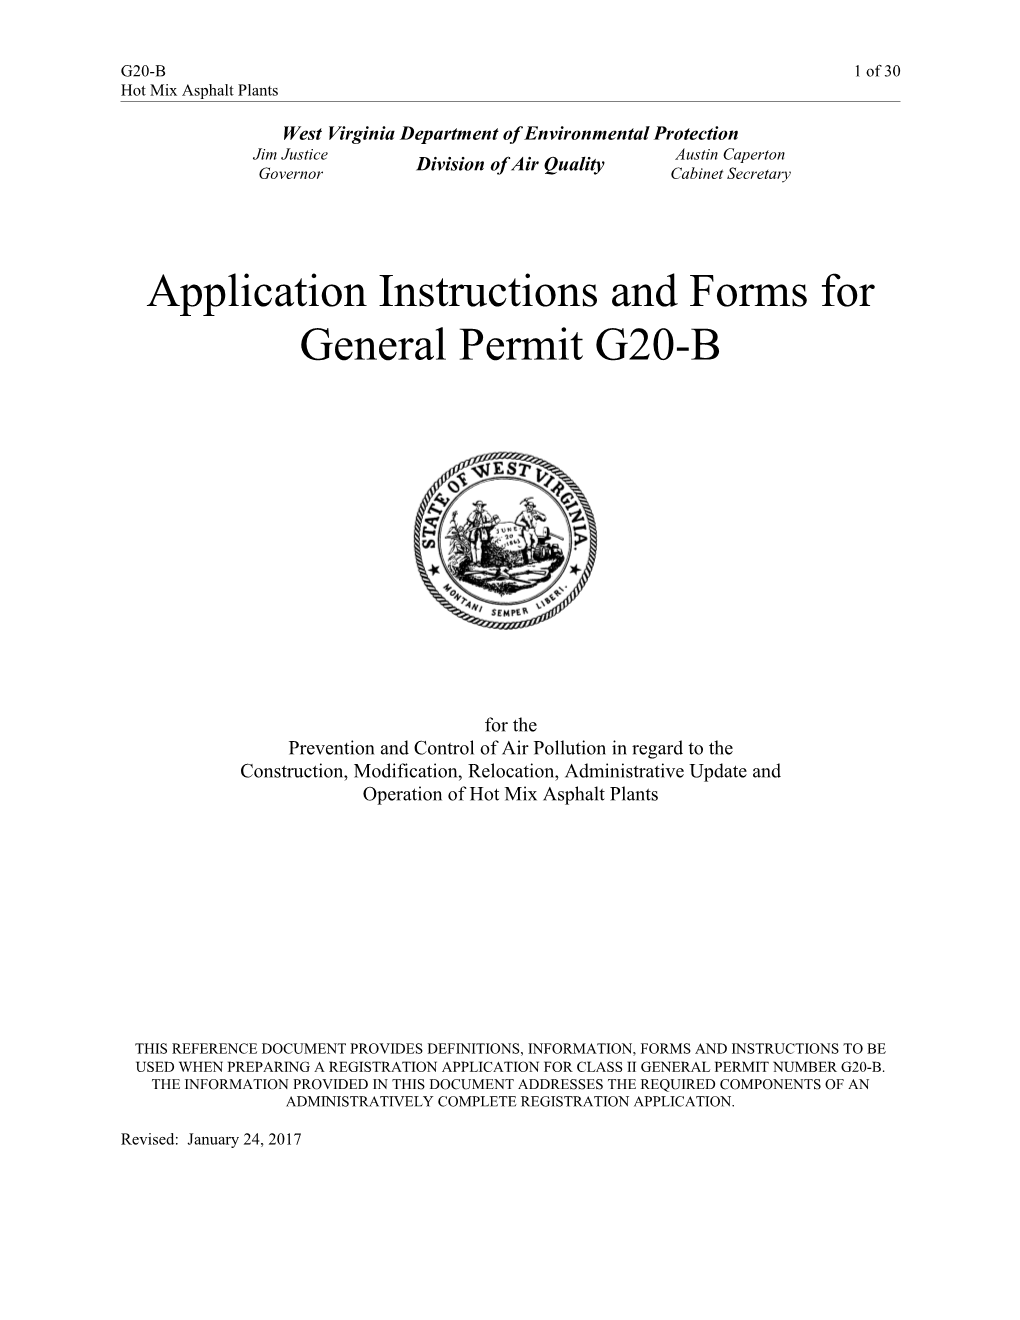 Application Instructions and Forms for General Permit G20-B